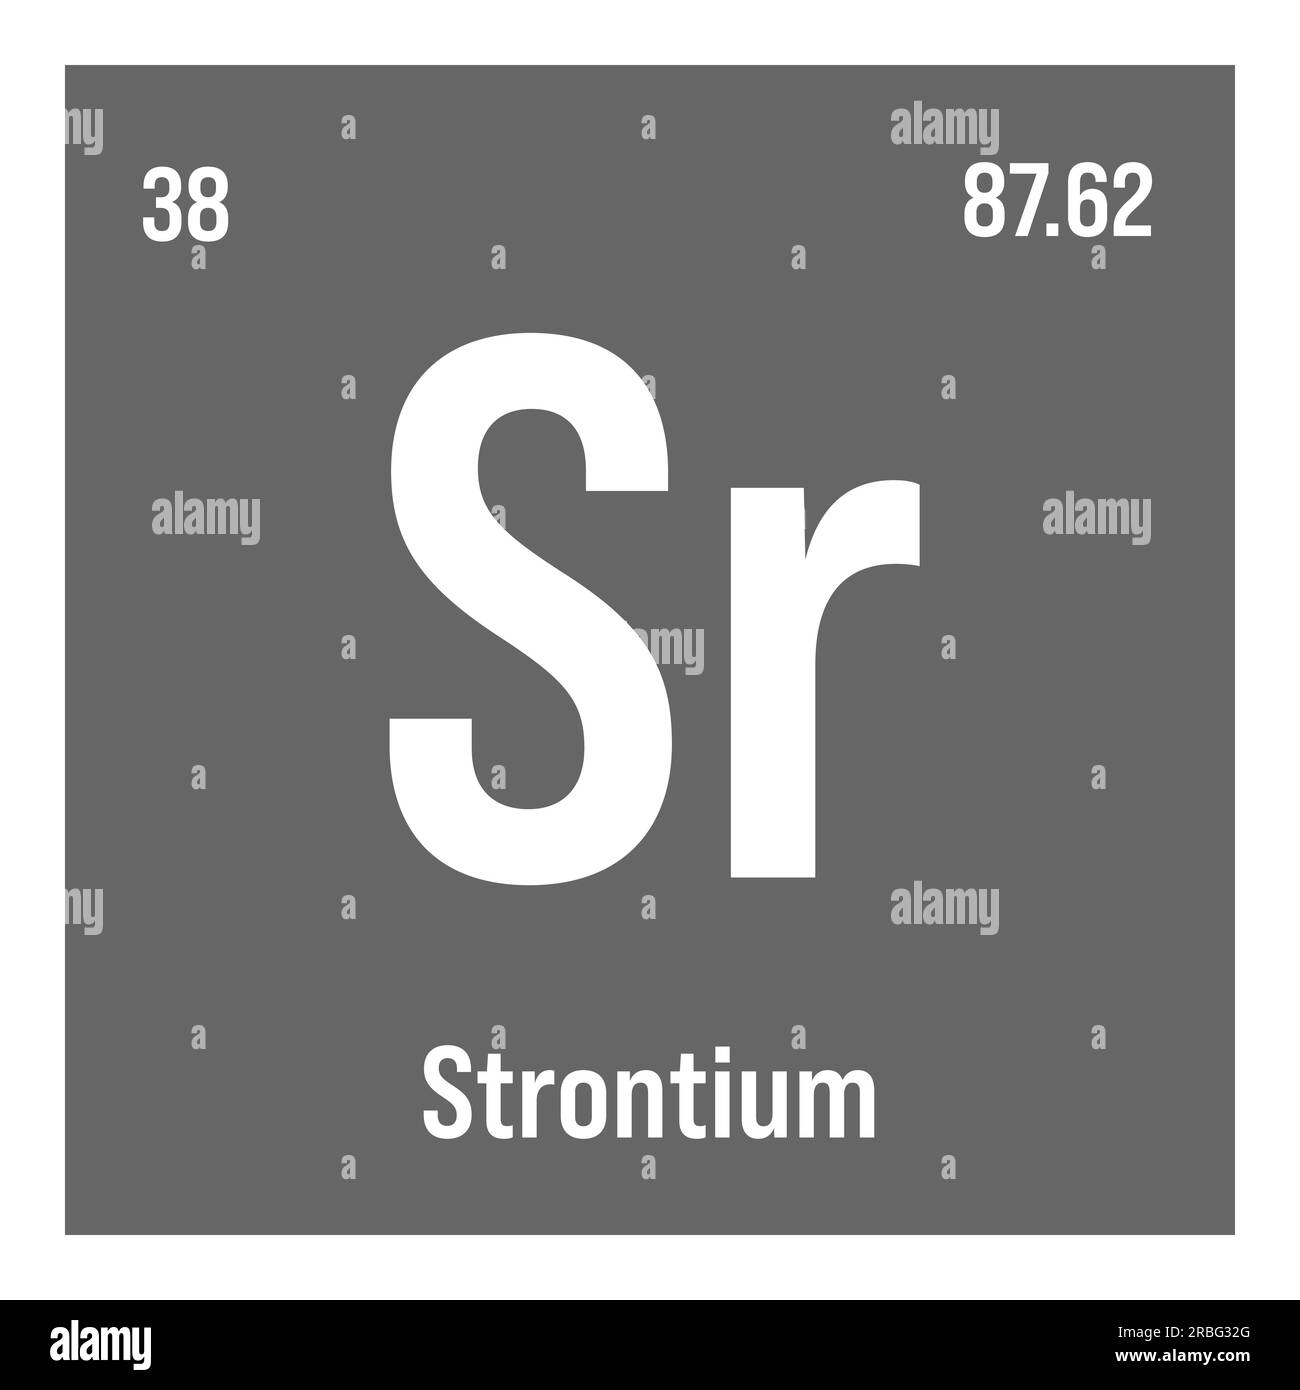 Strontium, Sr, periodic table element with name, symbol, atomic number and weight. Alkaline earth metal with various industrial uses, such as in certain types of glass, fireworks, and as a medication for certain medical conditions. Stock Vector